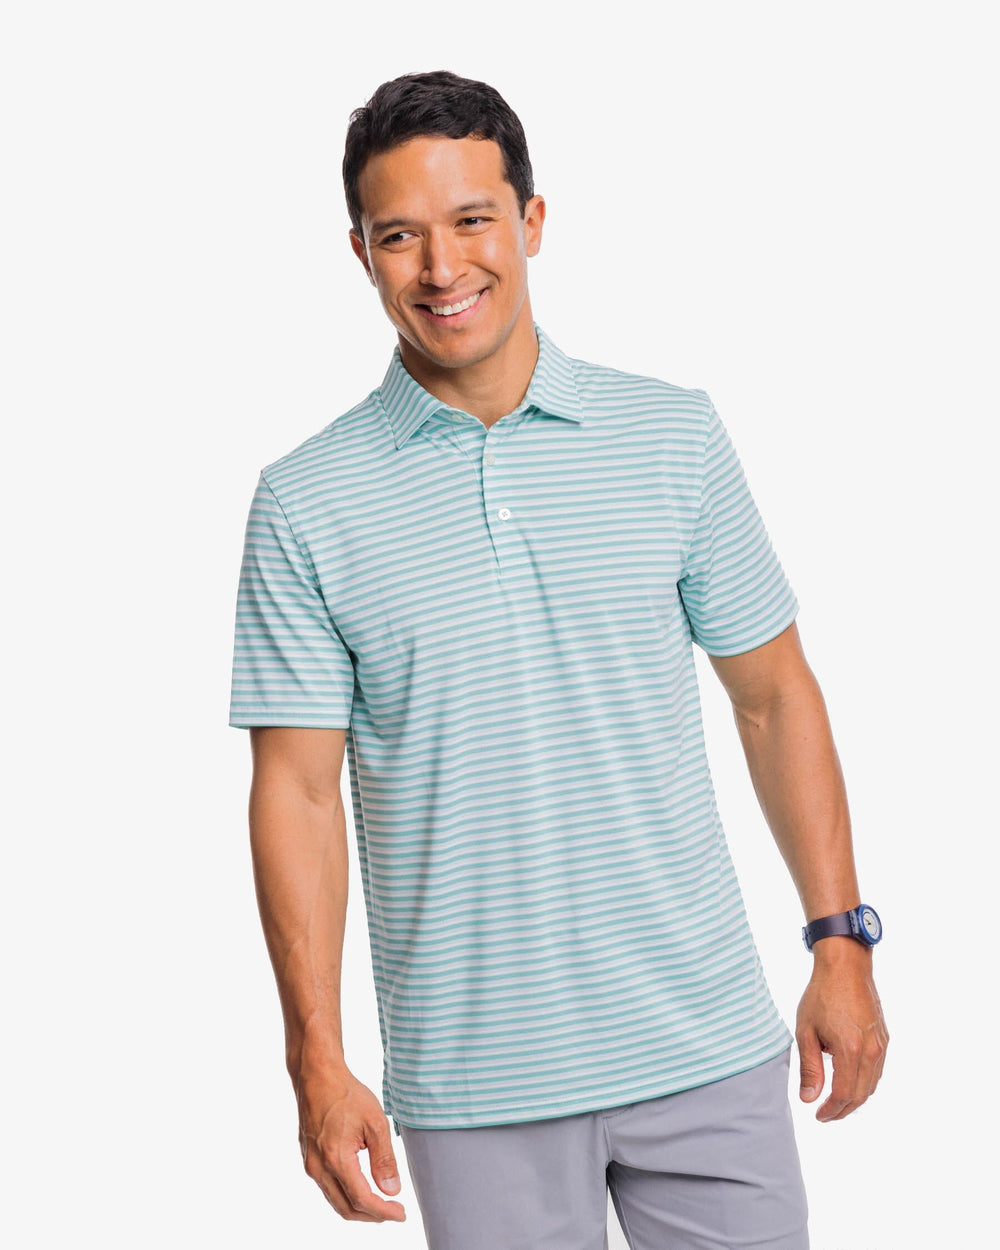 The front view of the Southern Tide Driver Gulf Stripe Polo Shirt by Southern Tide - Turquoise Sea